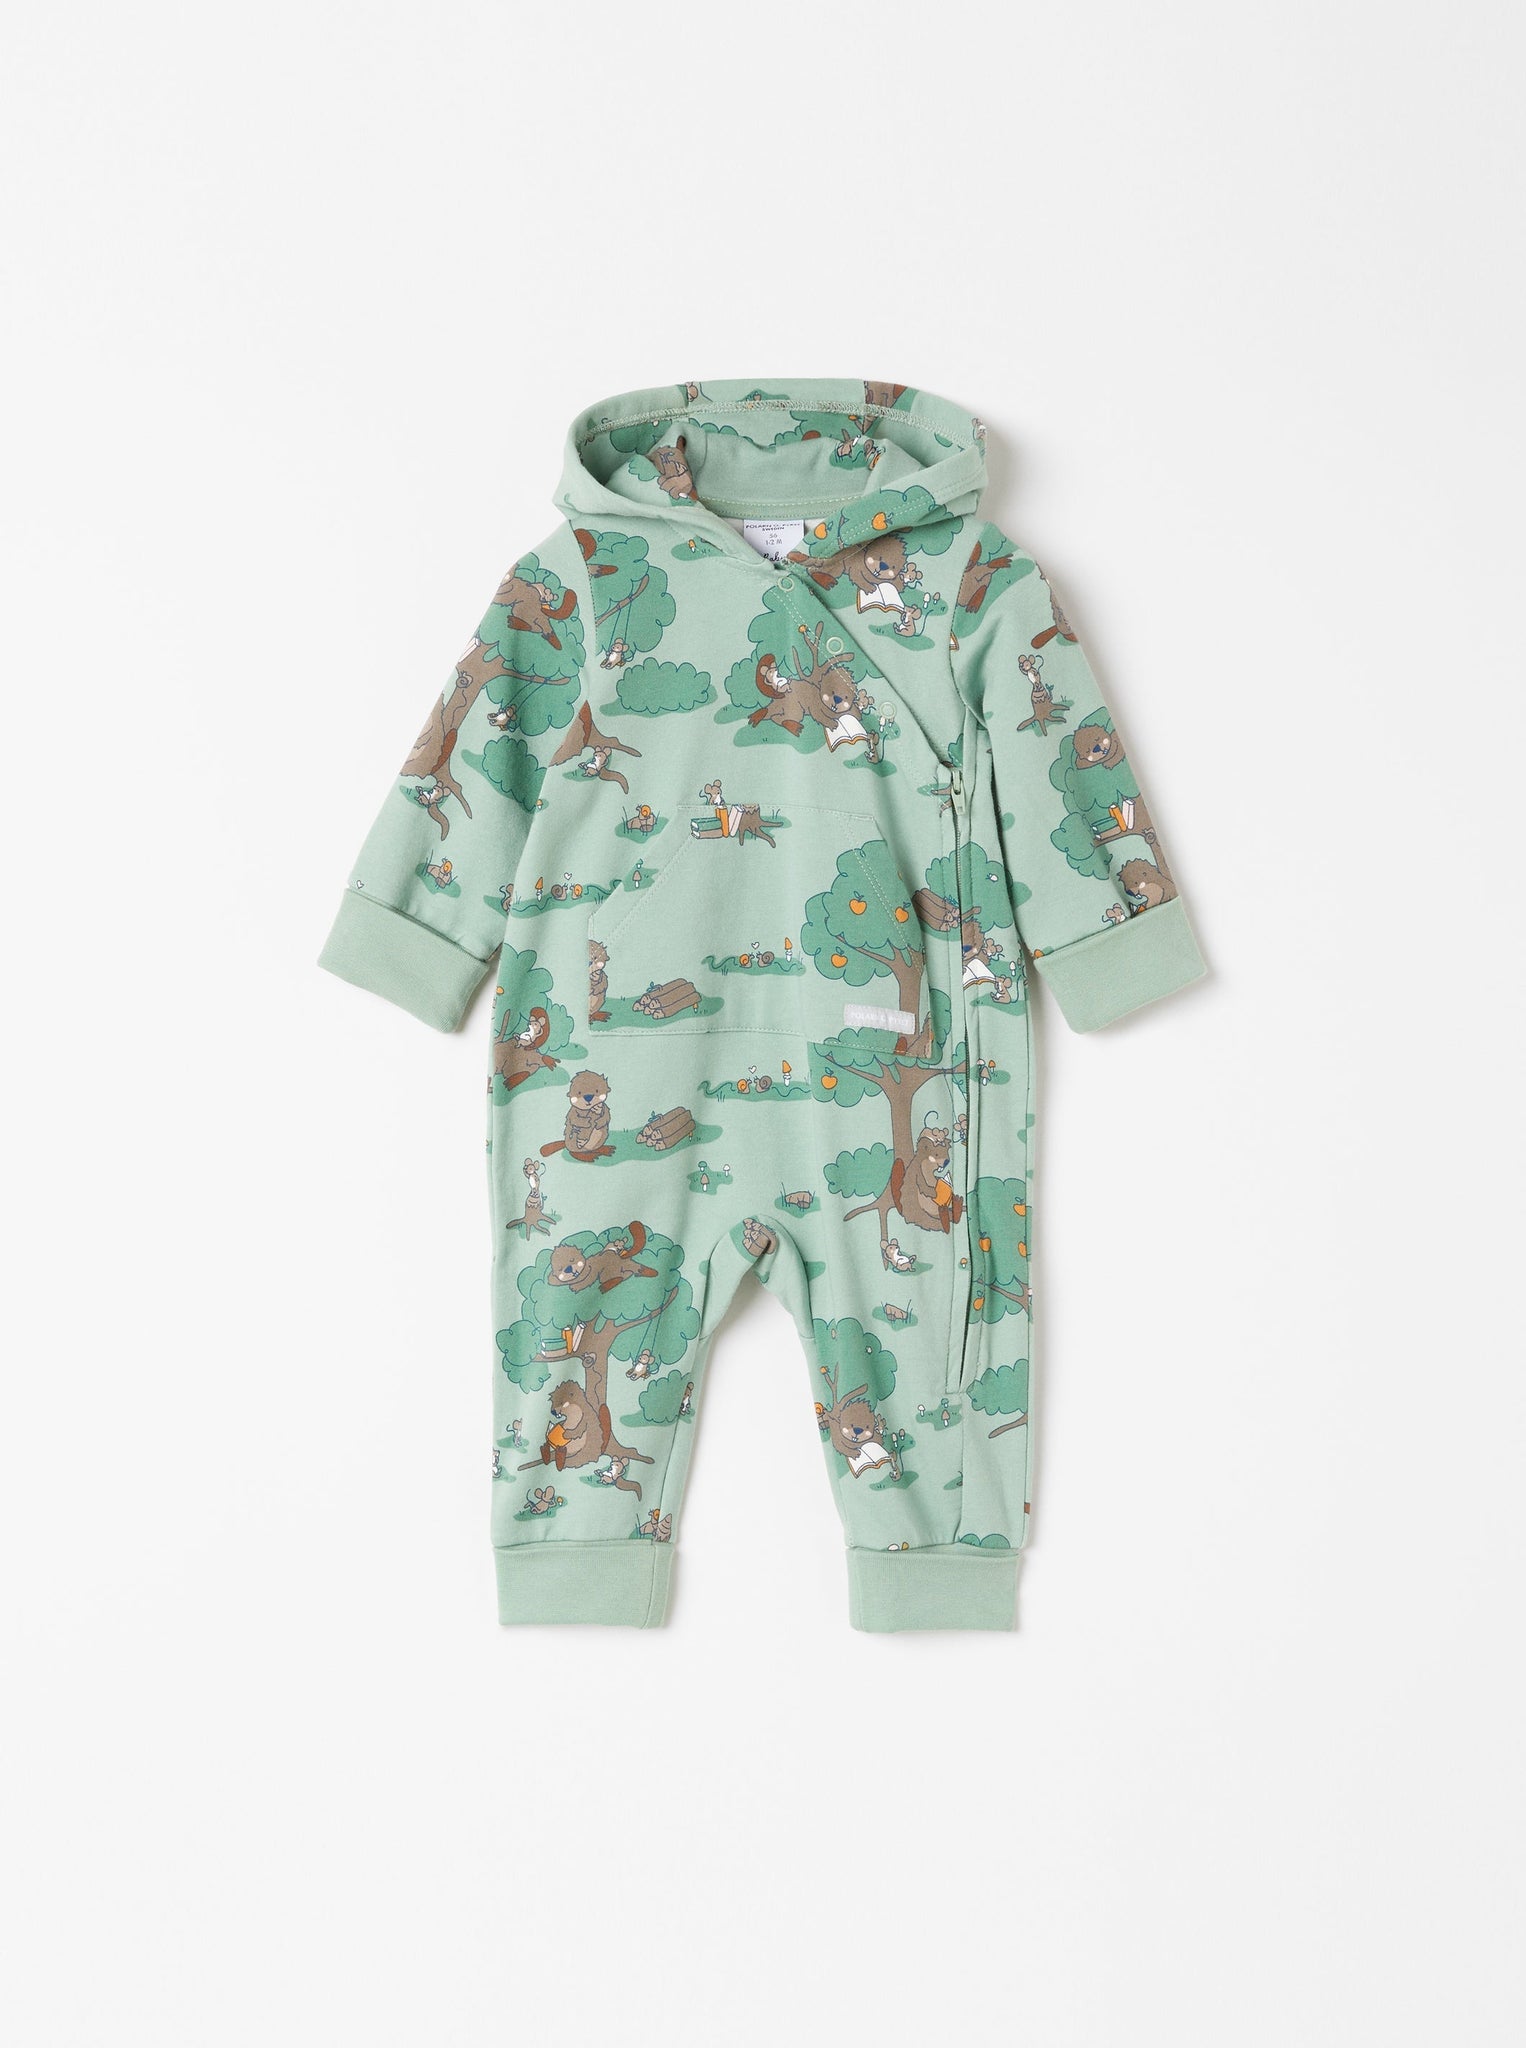 Nordic Green Baby All-In-One from the Polarn O. Pyret babywear collection. Ethically produced baby clothing.